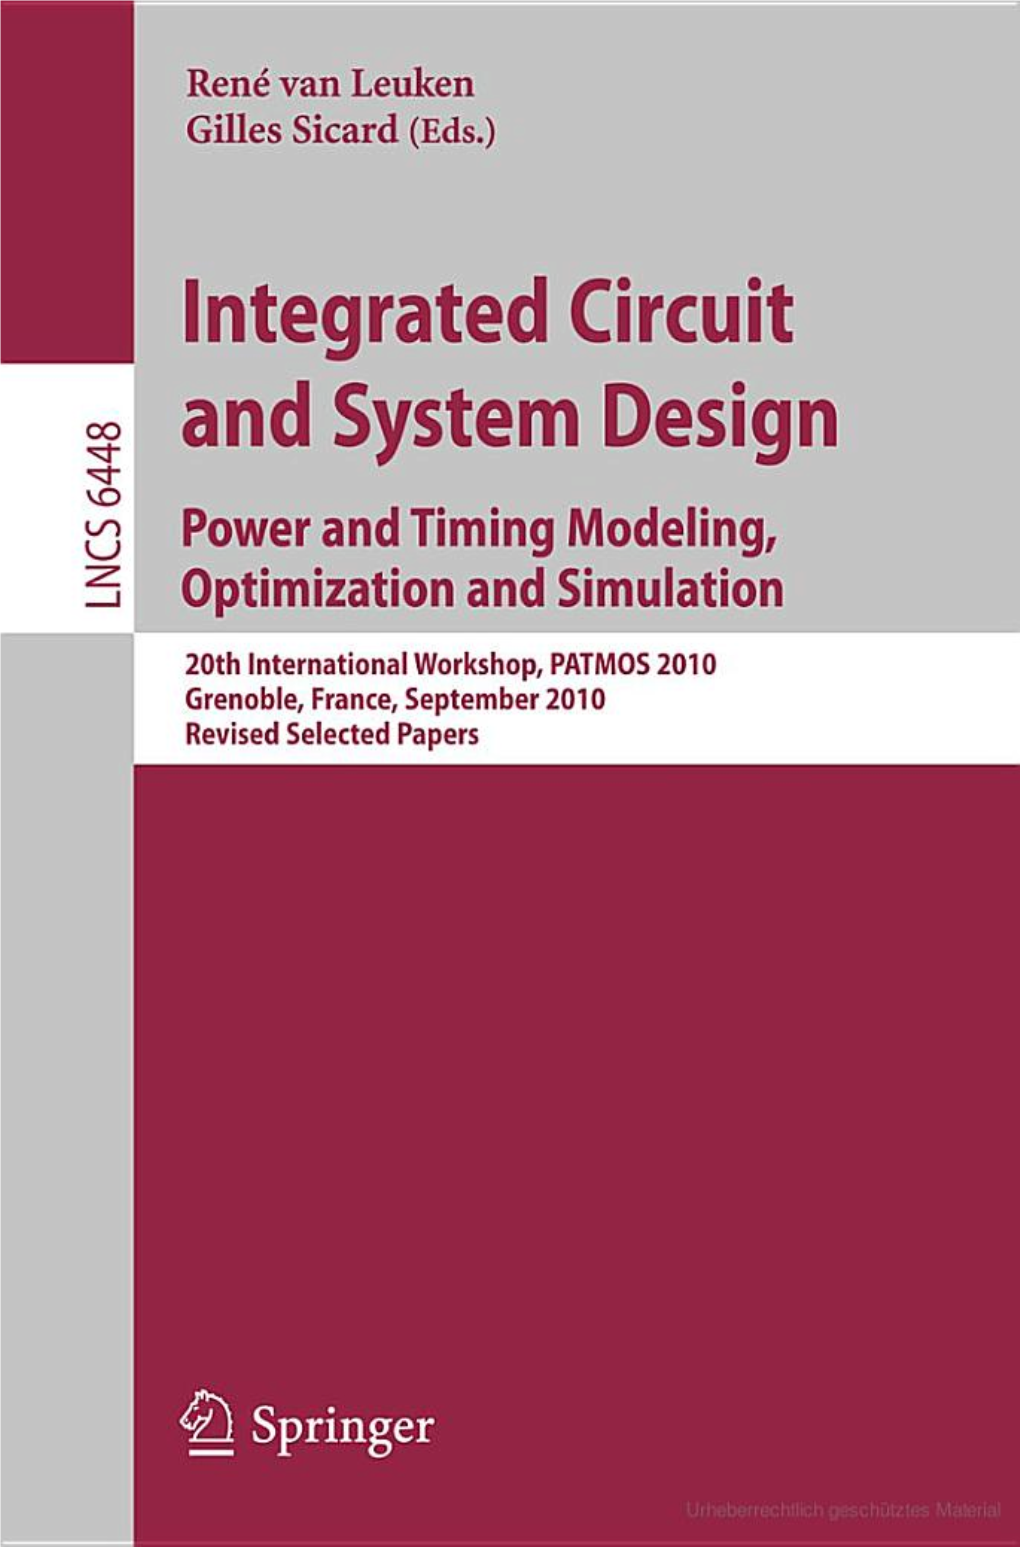 Integrated Circuit and System Design. Power and Timing Modeling